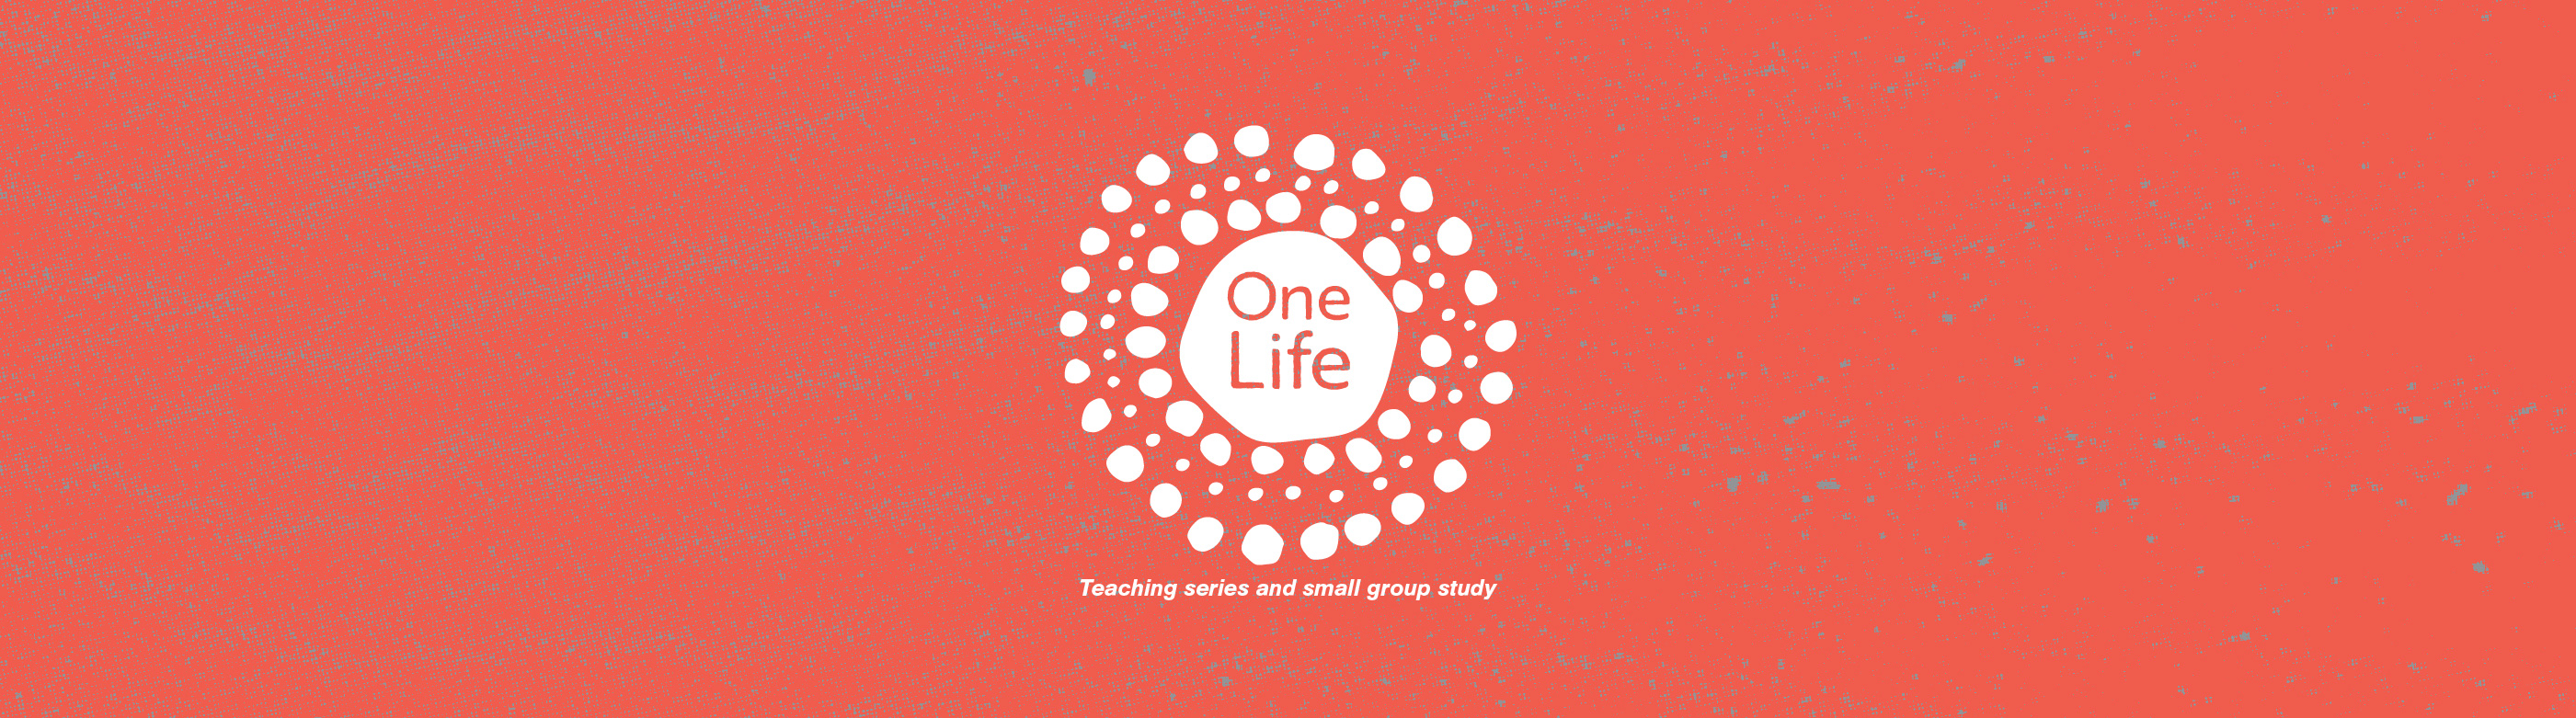 One Life Header Image with Logo